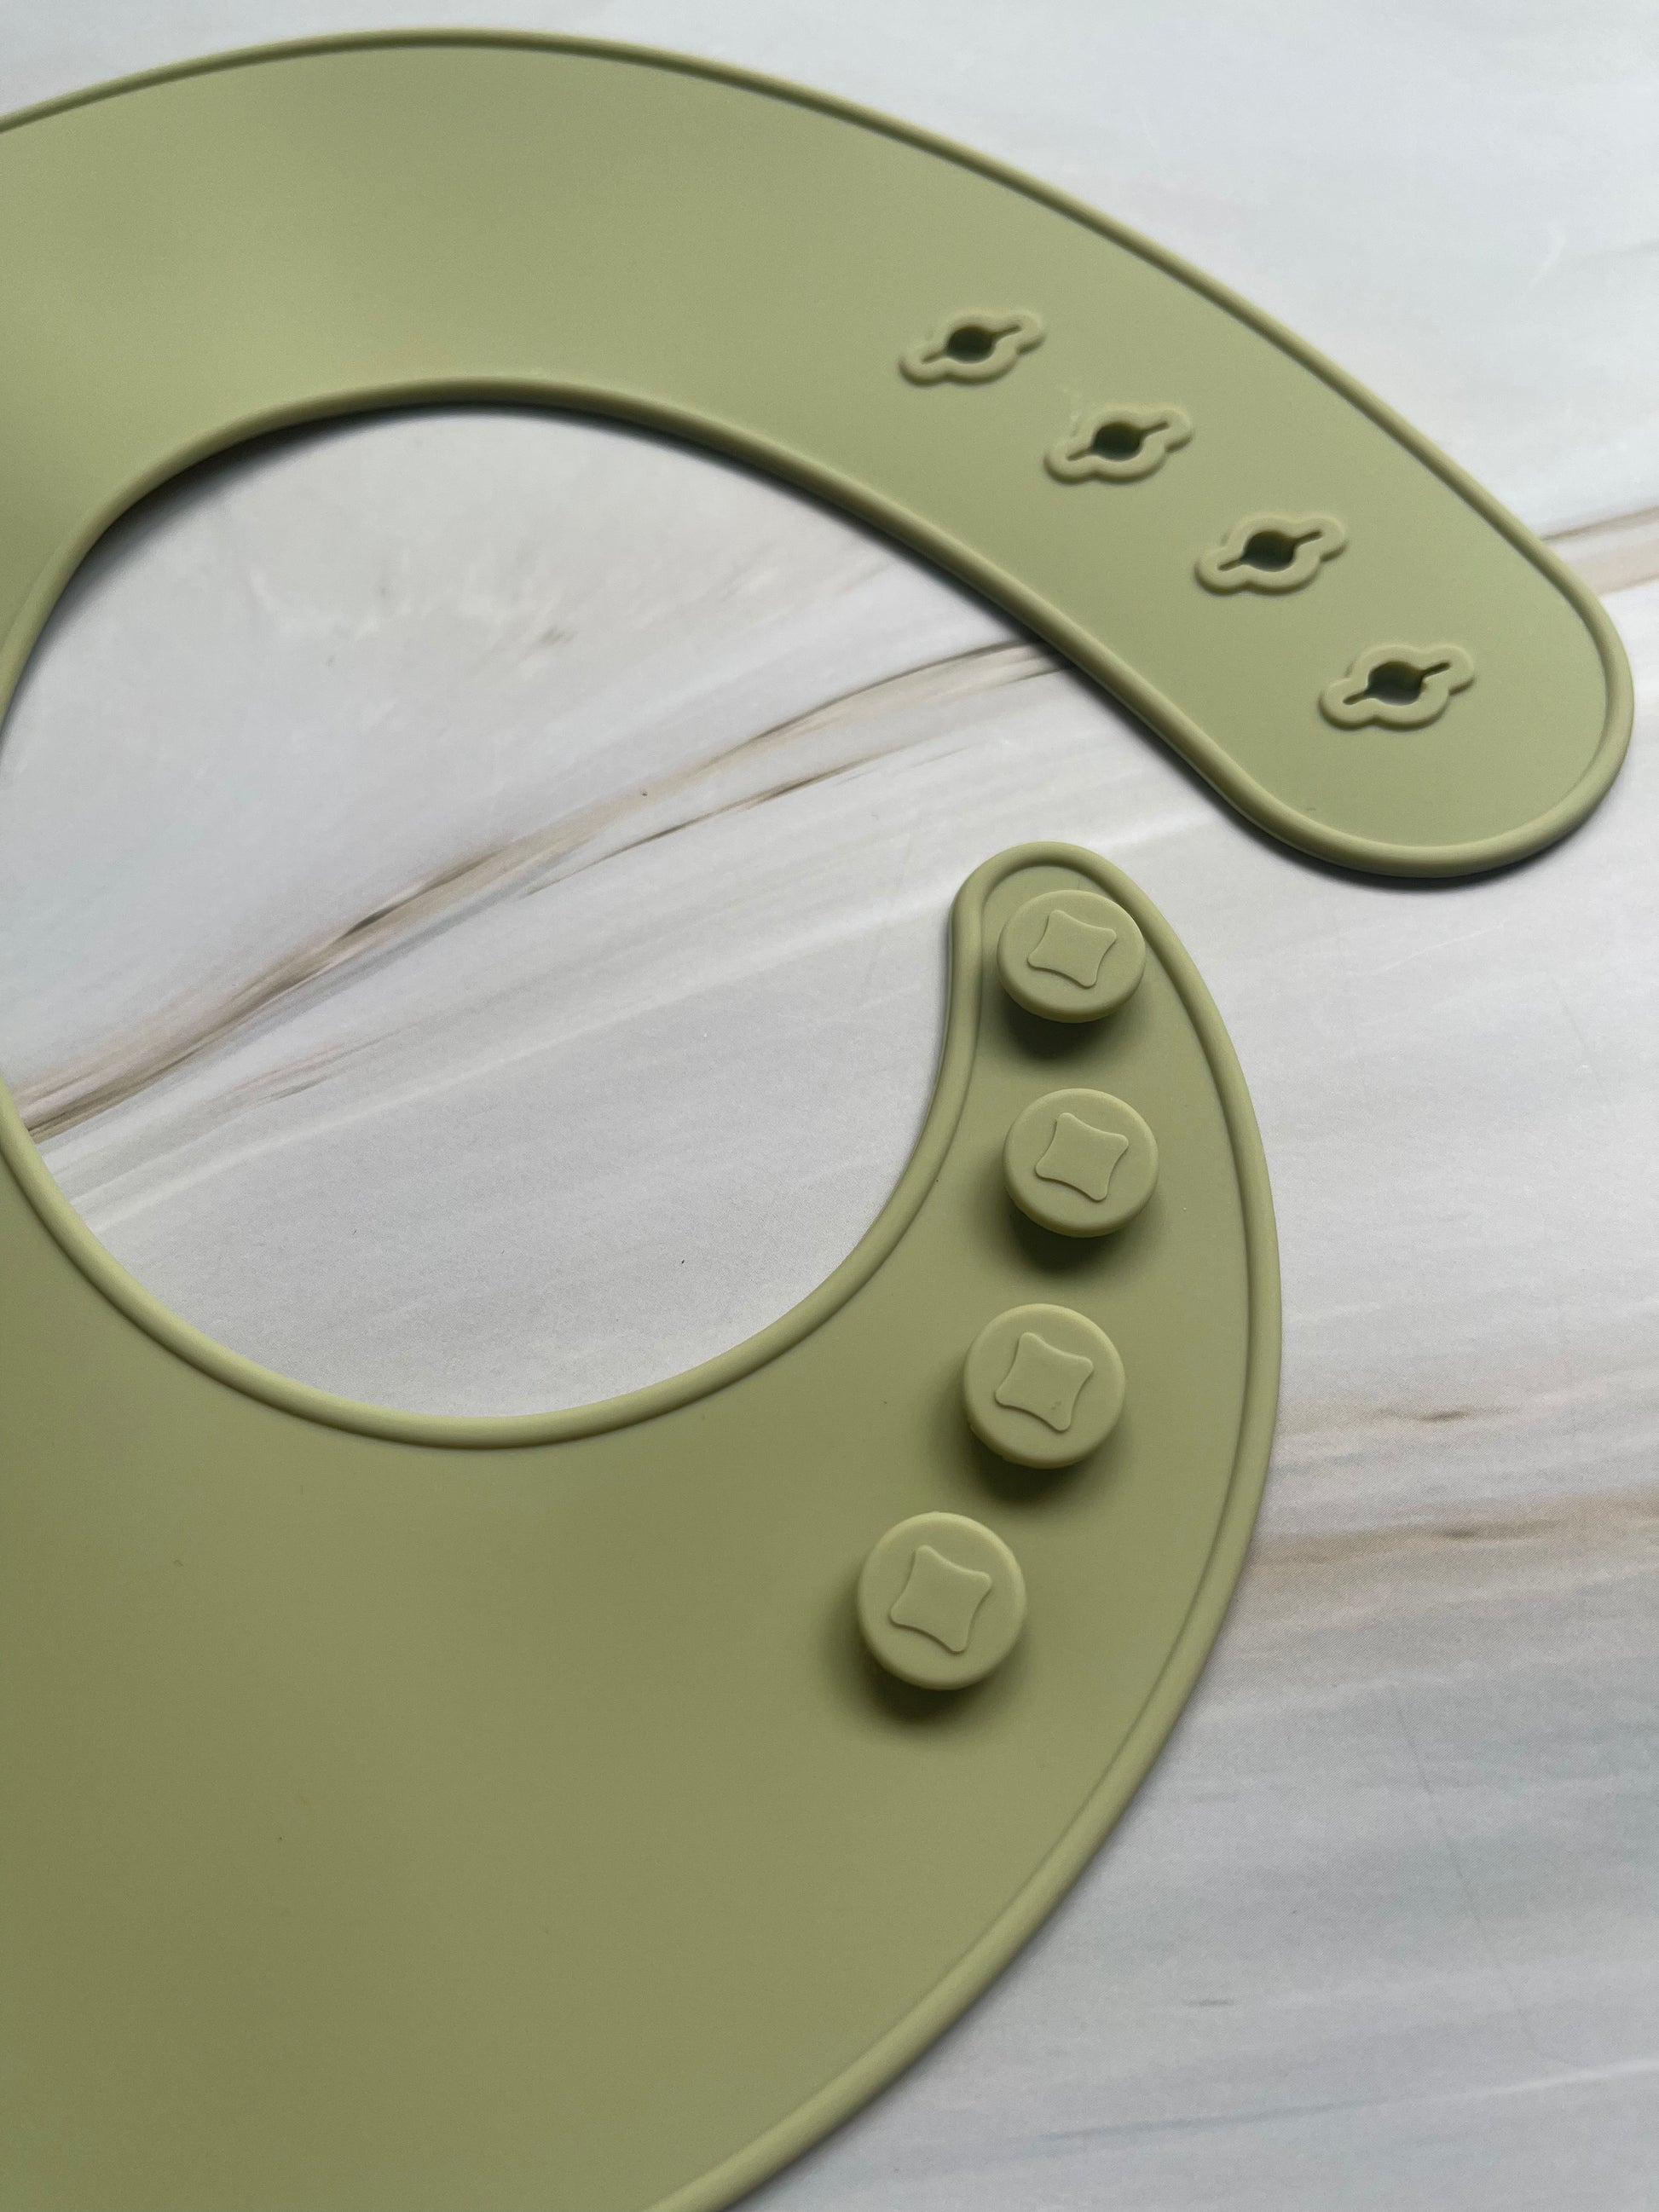 Our silicone bib is long-lasting, save more money